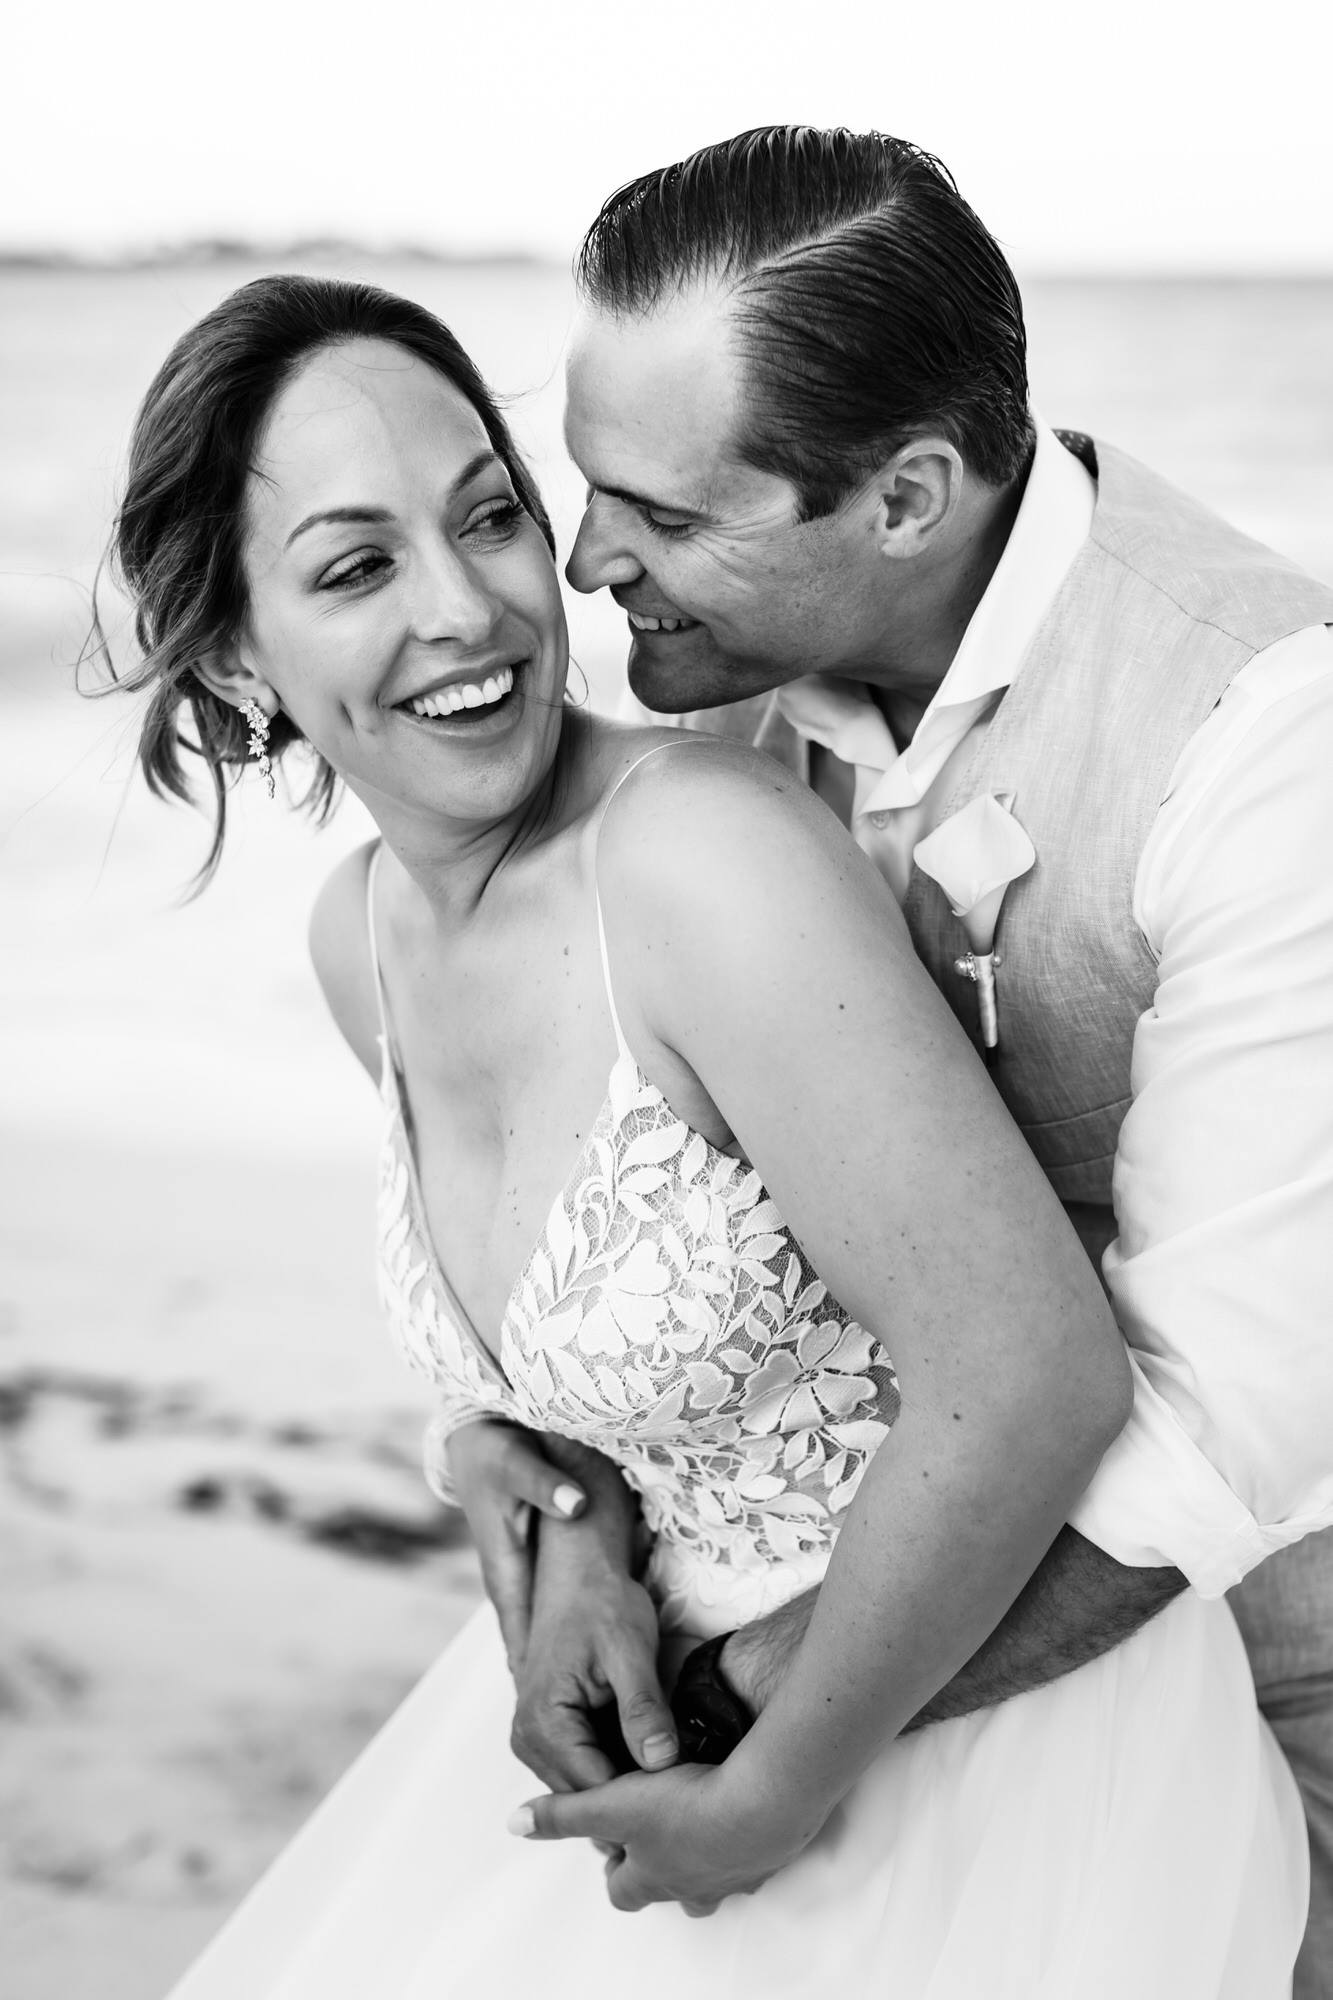 Bride and groom laughing together on beach